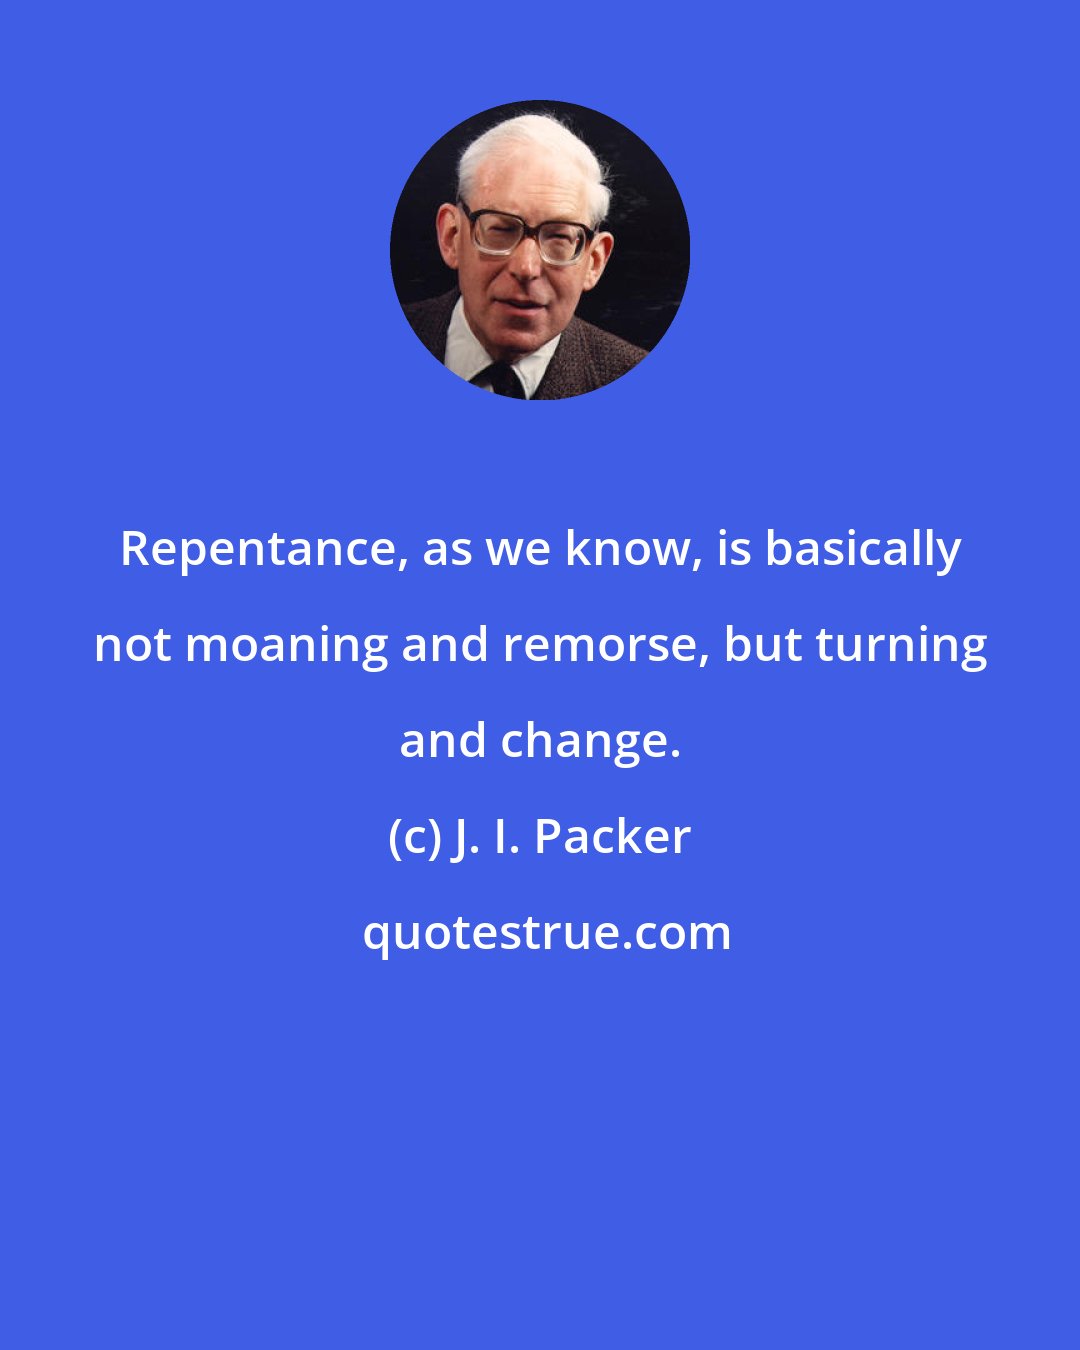 J. I. Packer: Repentance, as we know, is basically not moaning and remorse, but turning and change.